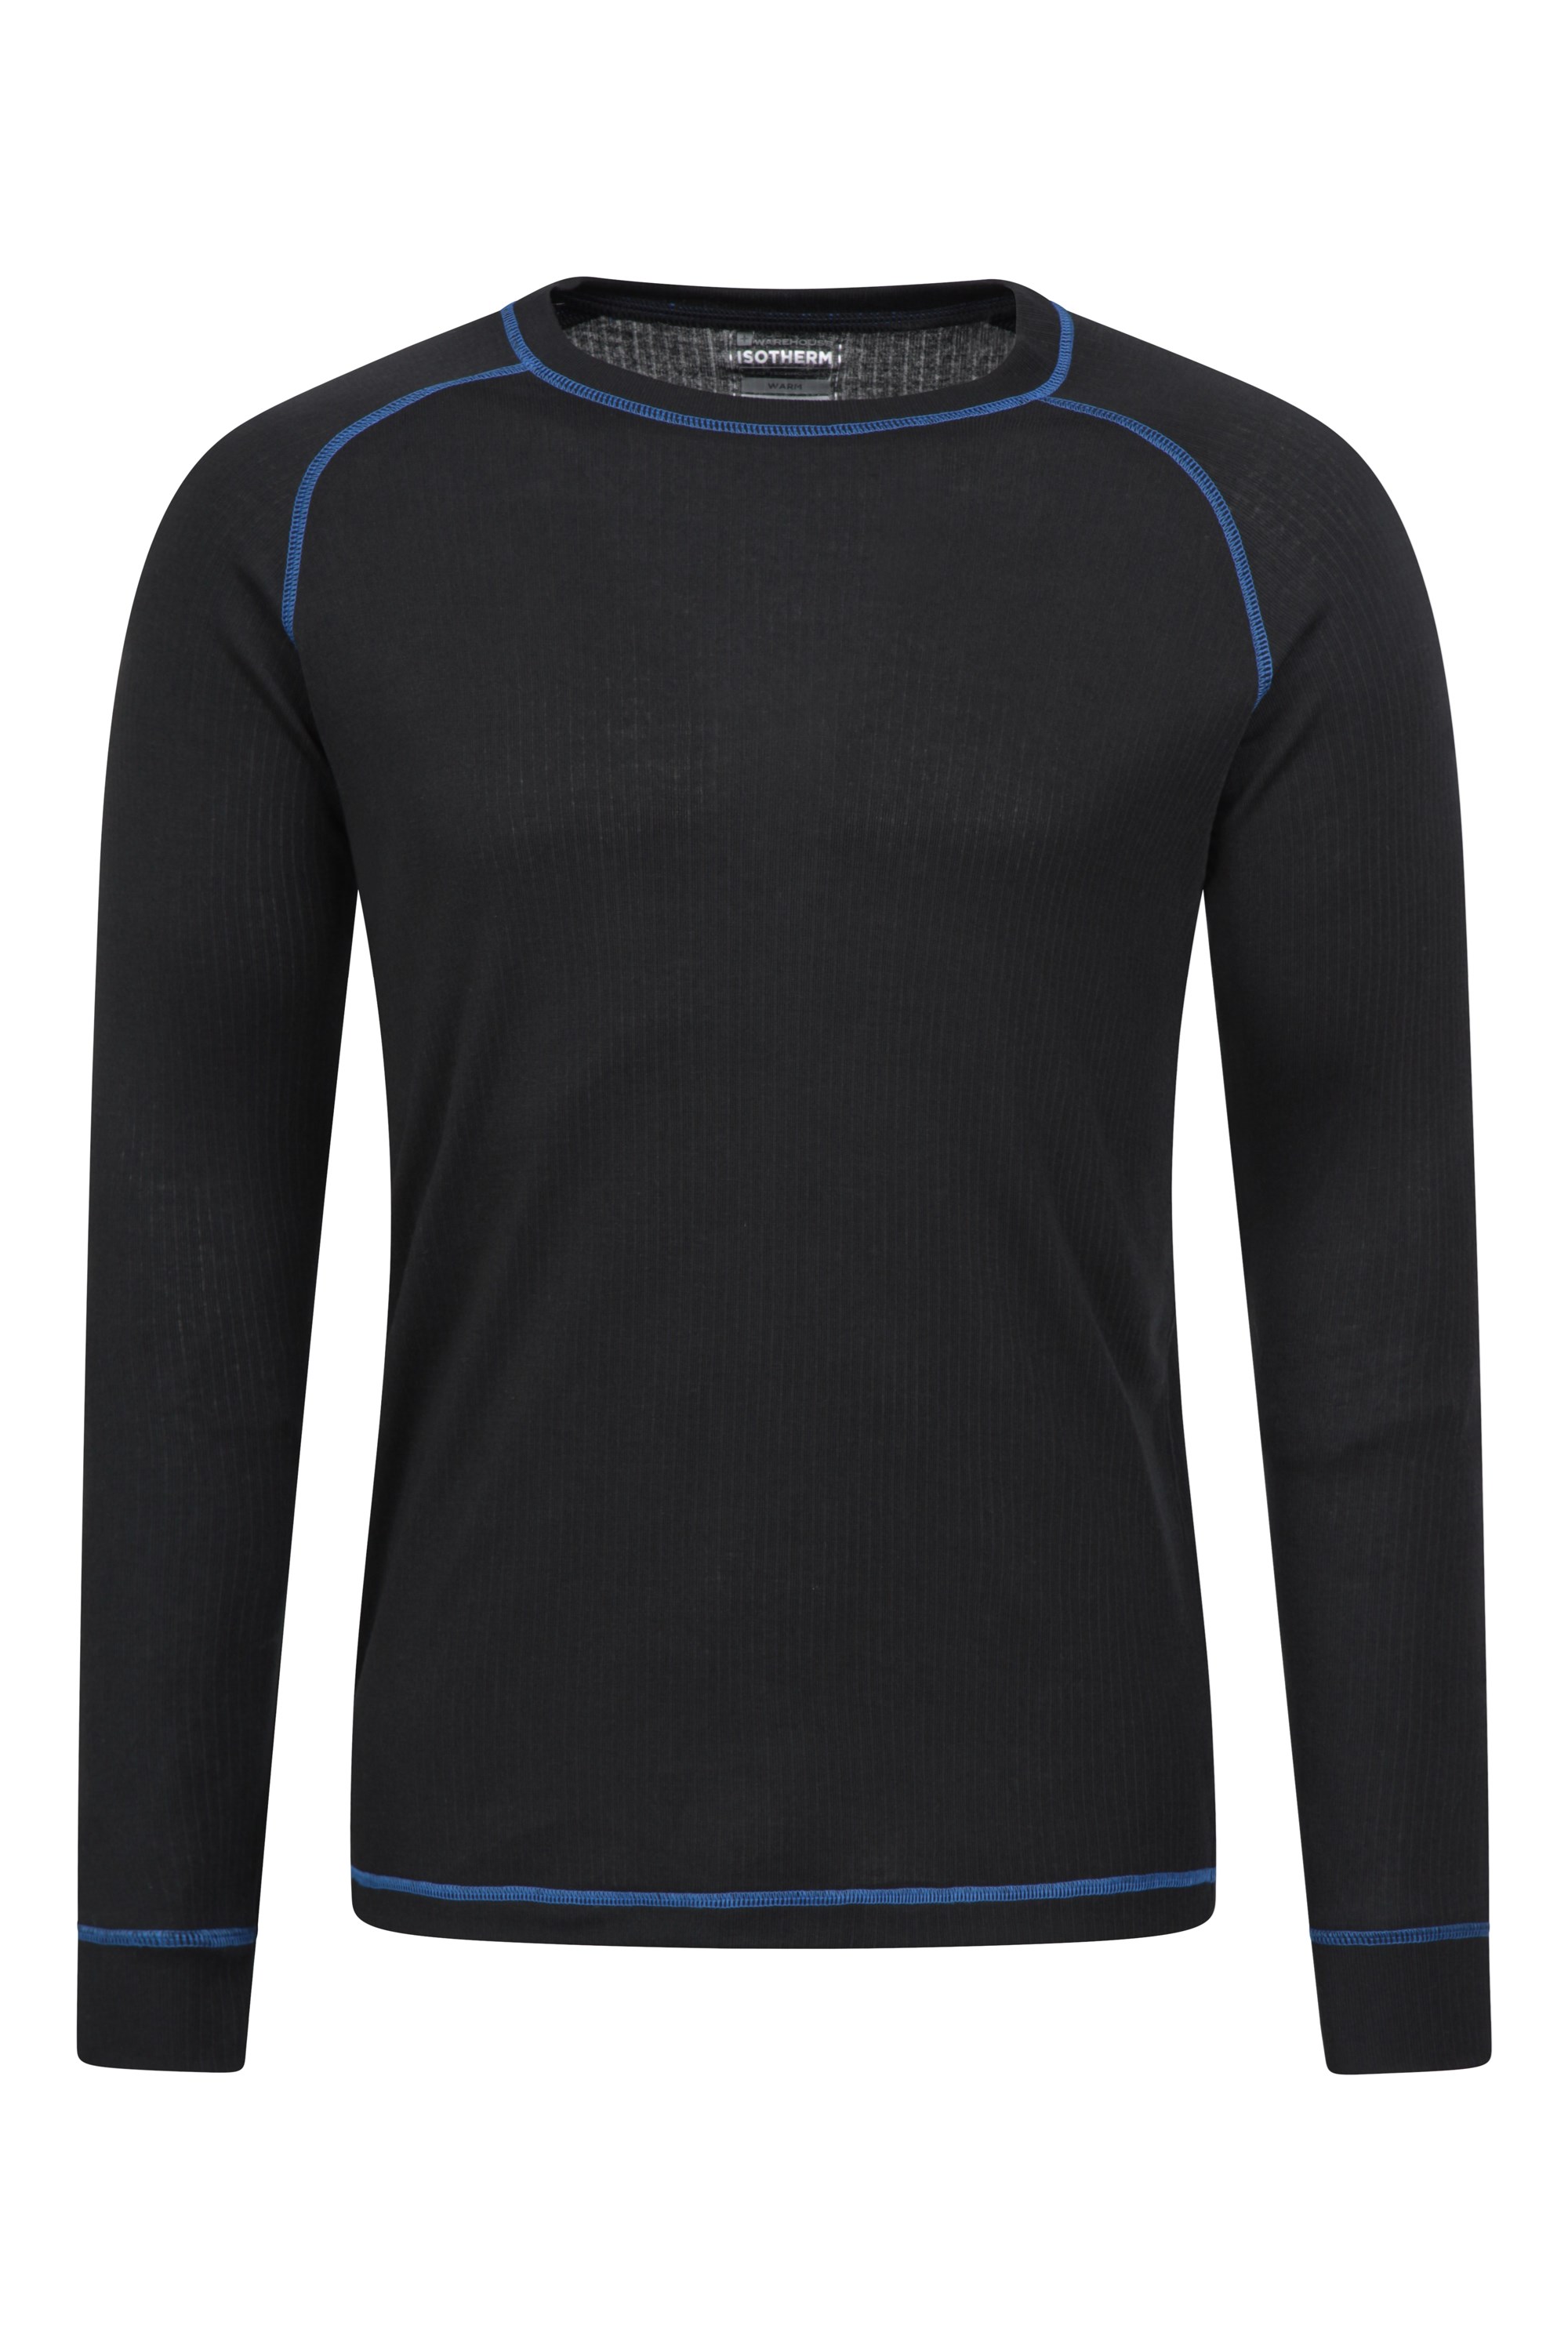 Mountain Warehouse Talus Mens Thermal Baselayer Tee Short Sleeve Round Neck 